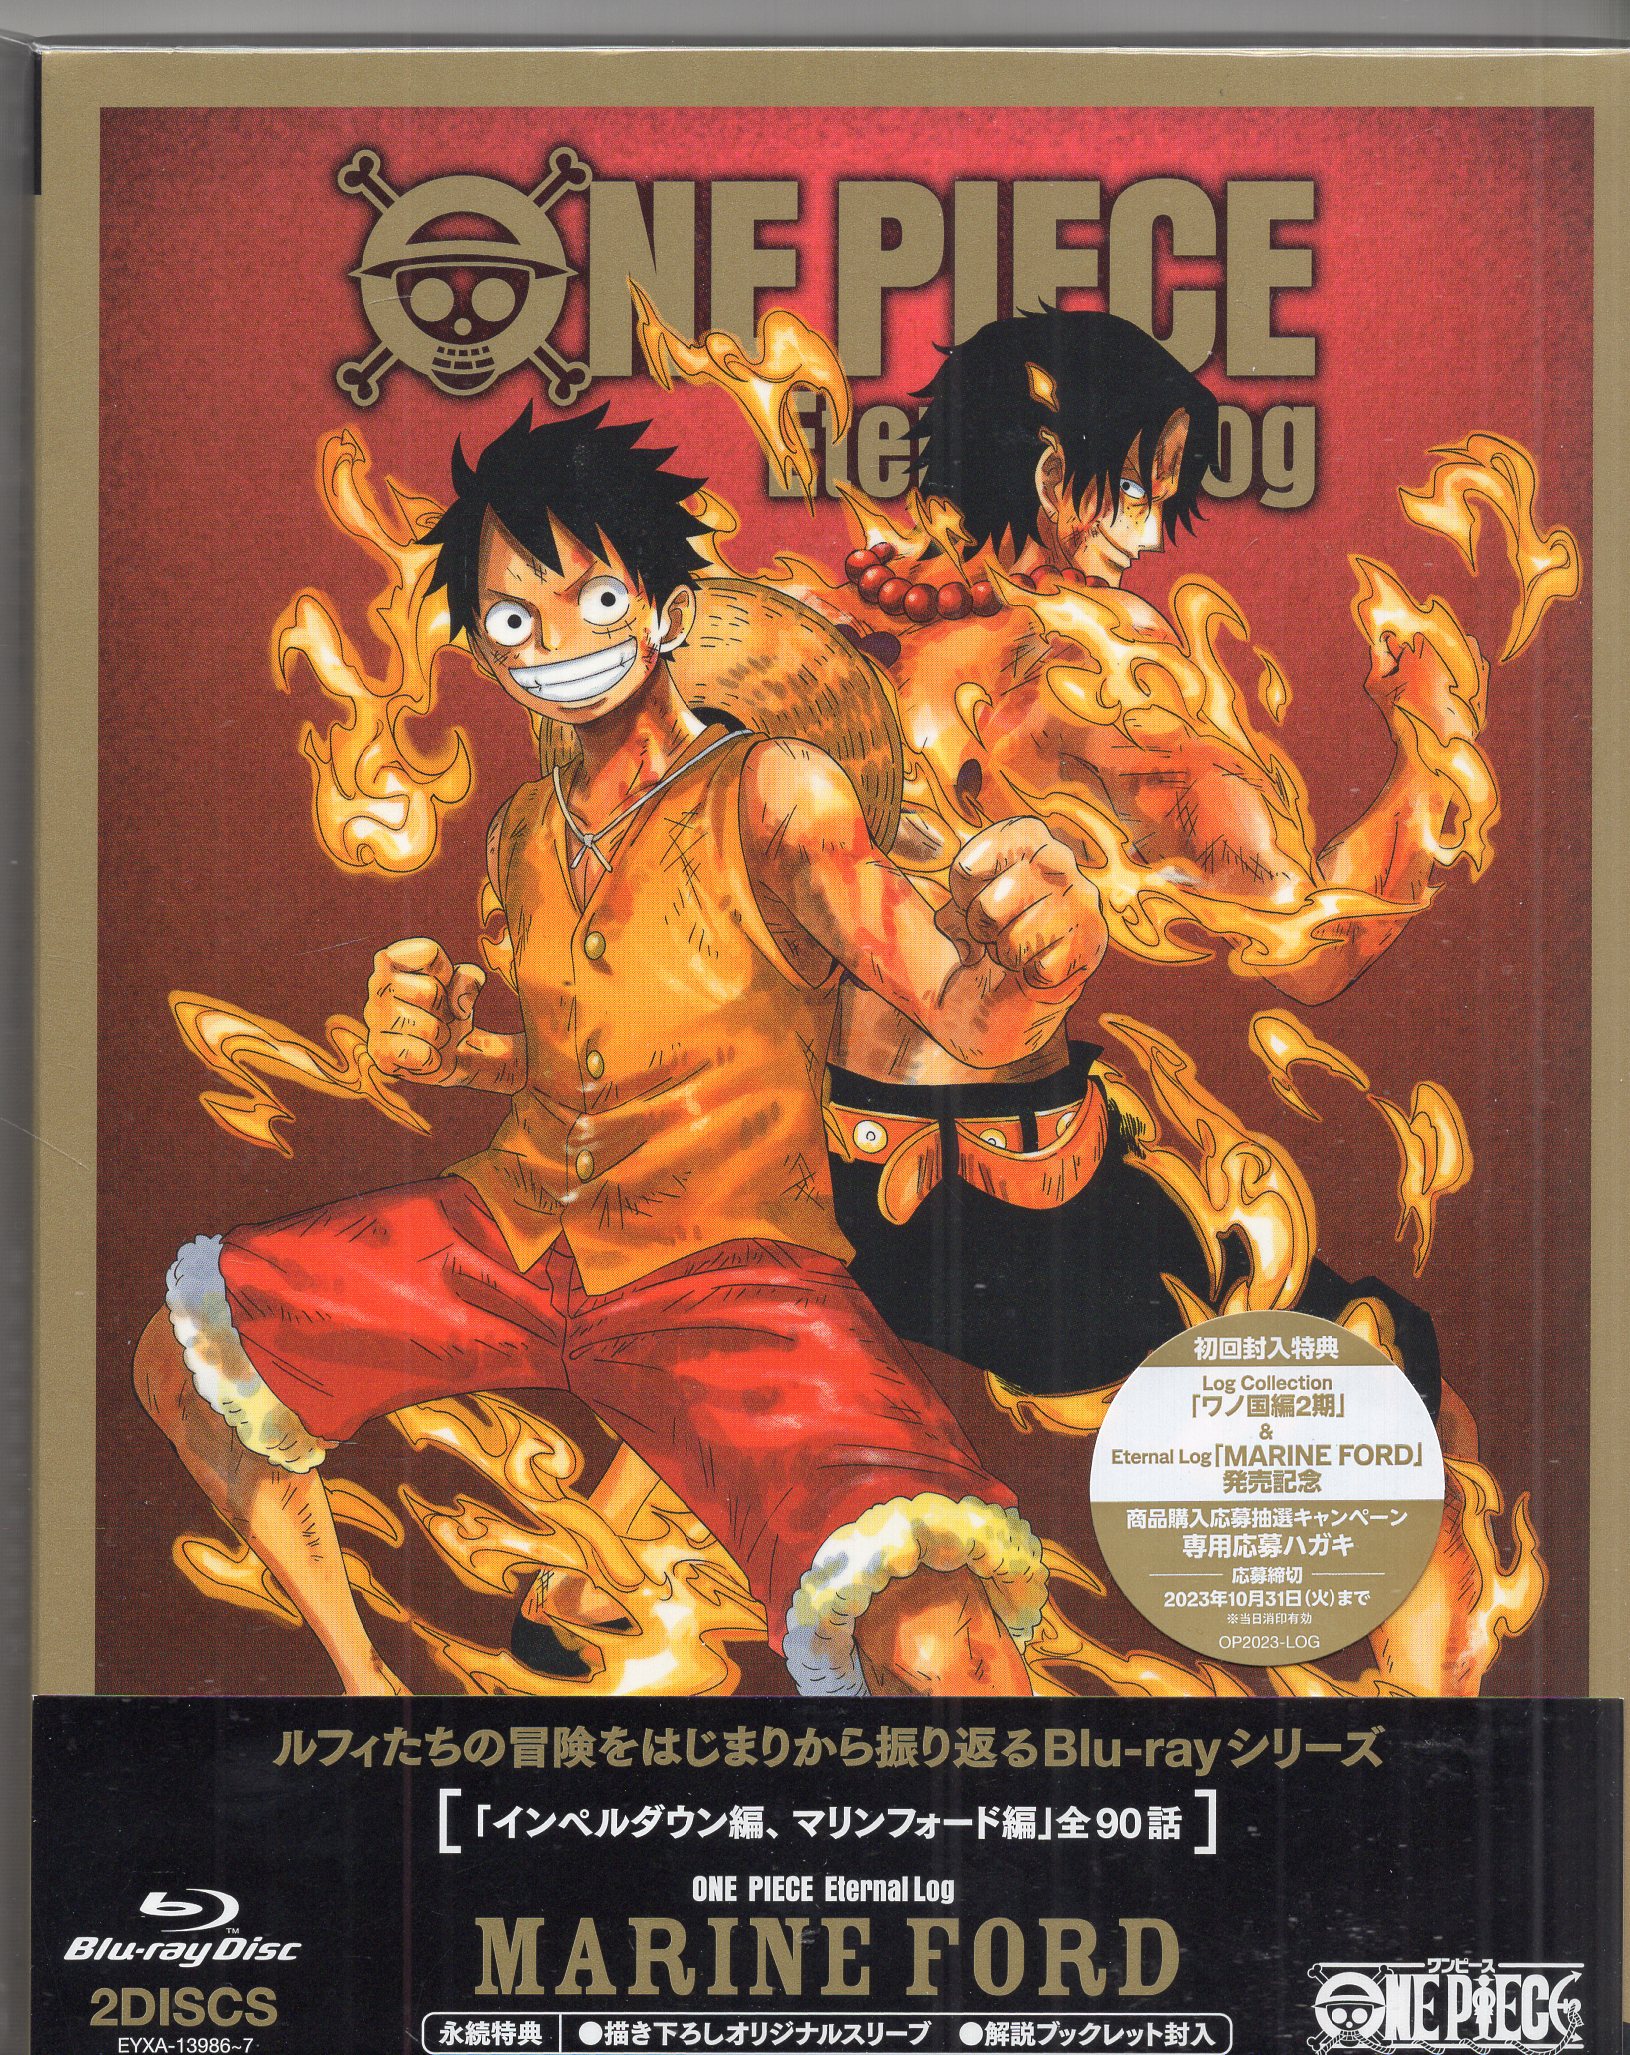 One Piece Collection 31 Blu-ray/DVD